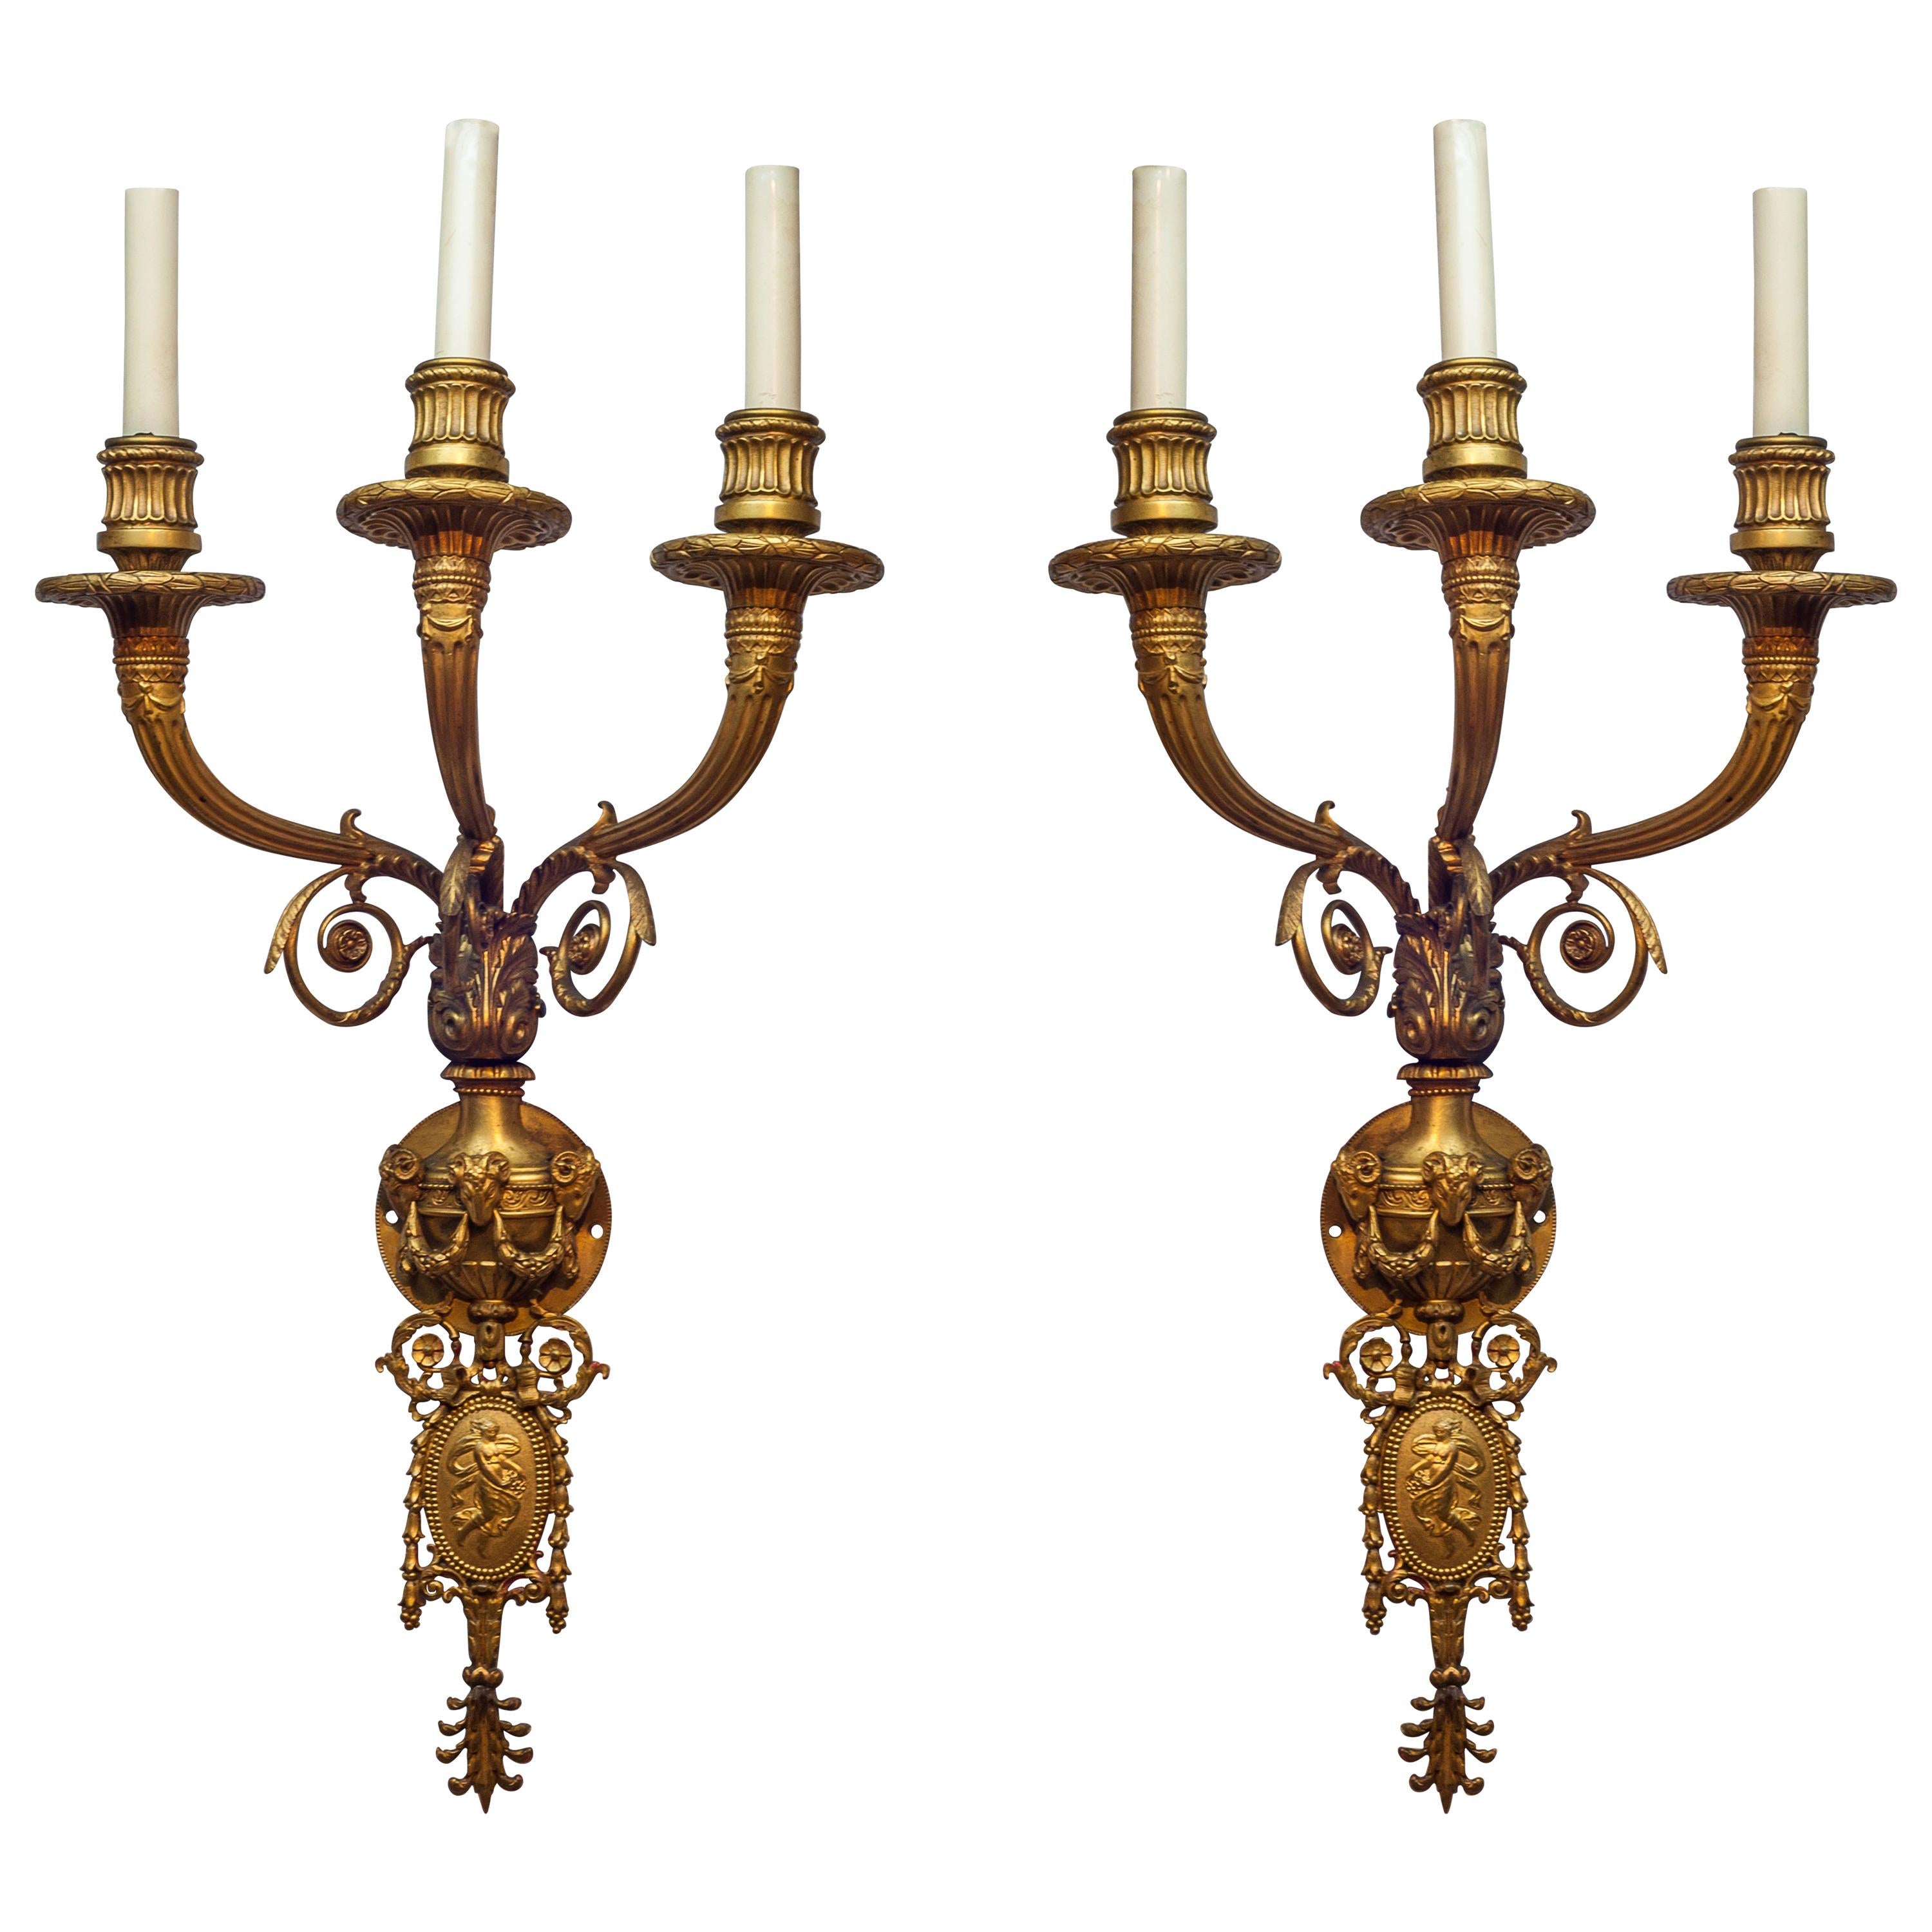 Pair of Three-Arm Gilt Bronze Wall Sconces Attributed to Caldwell For Sale